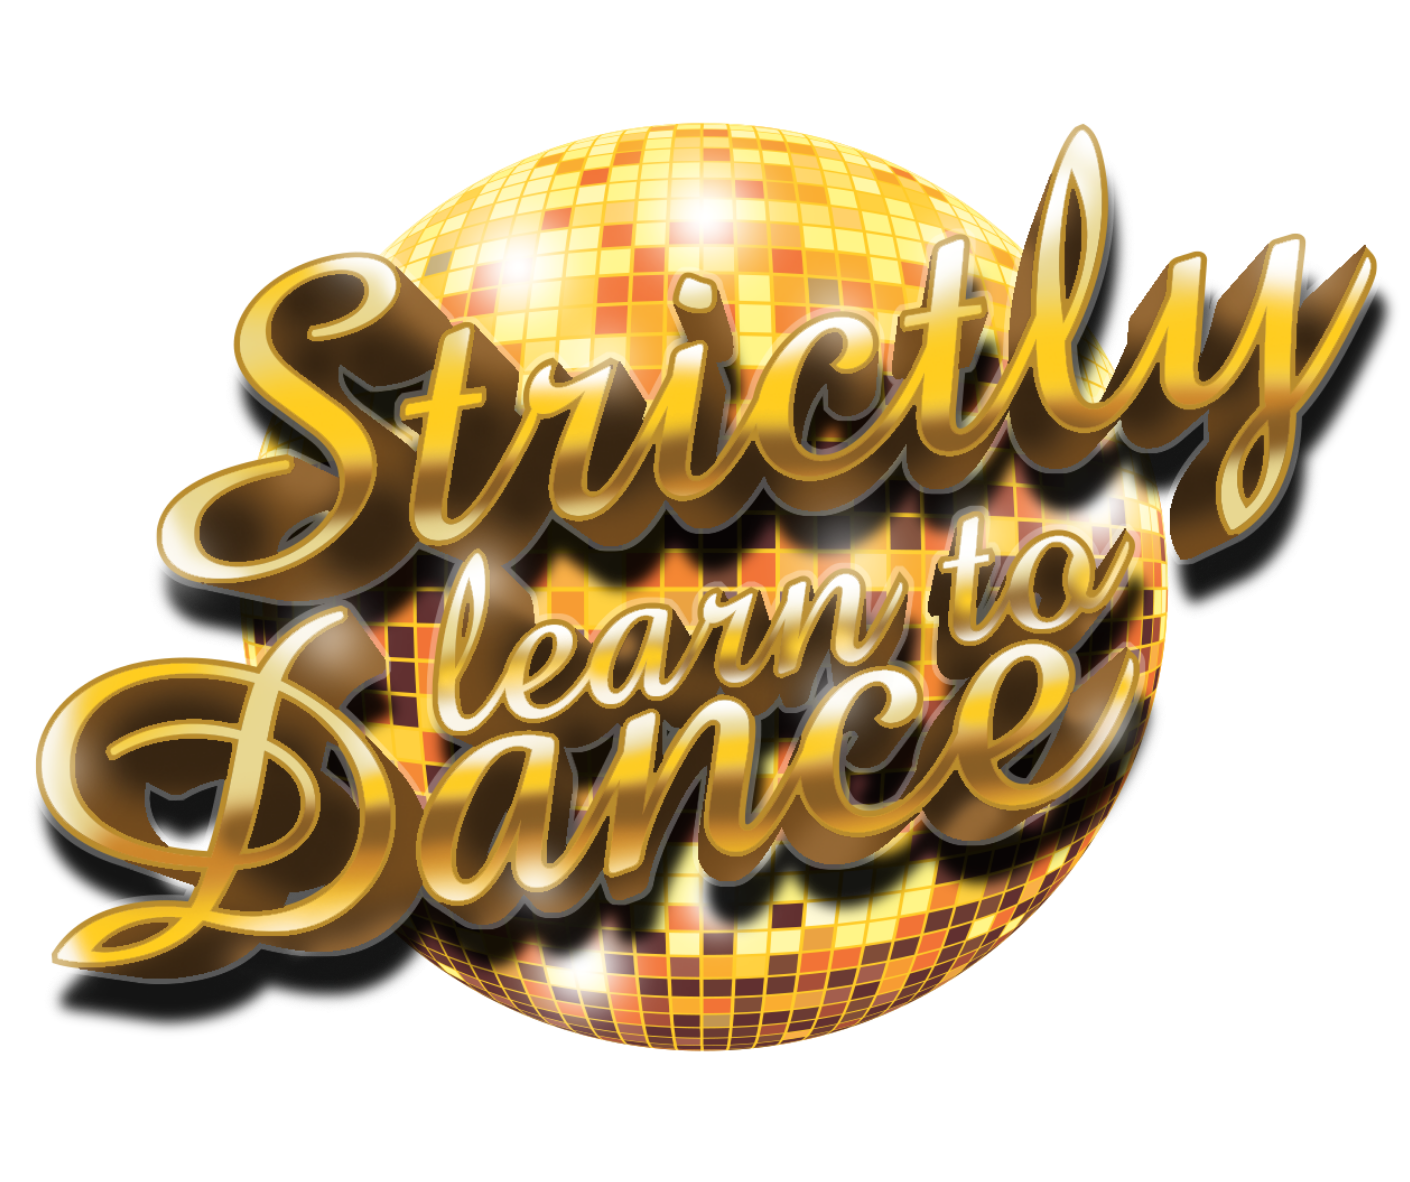 Strictly learn to dance